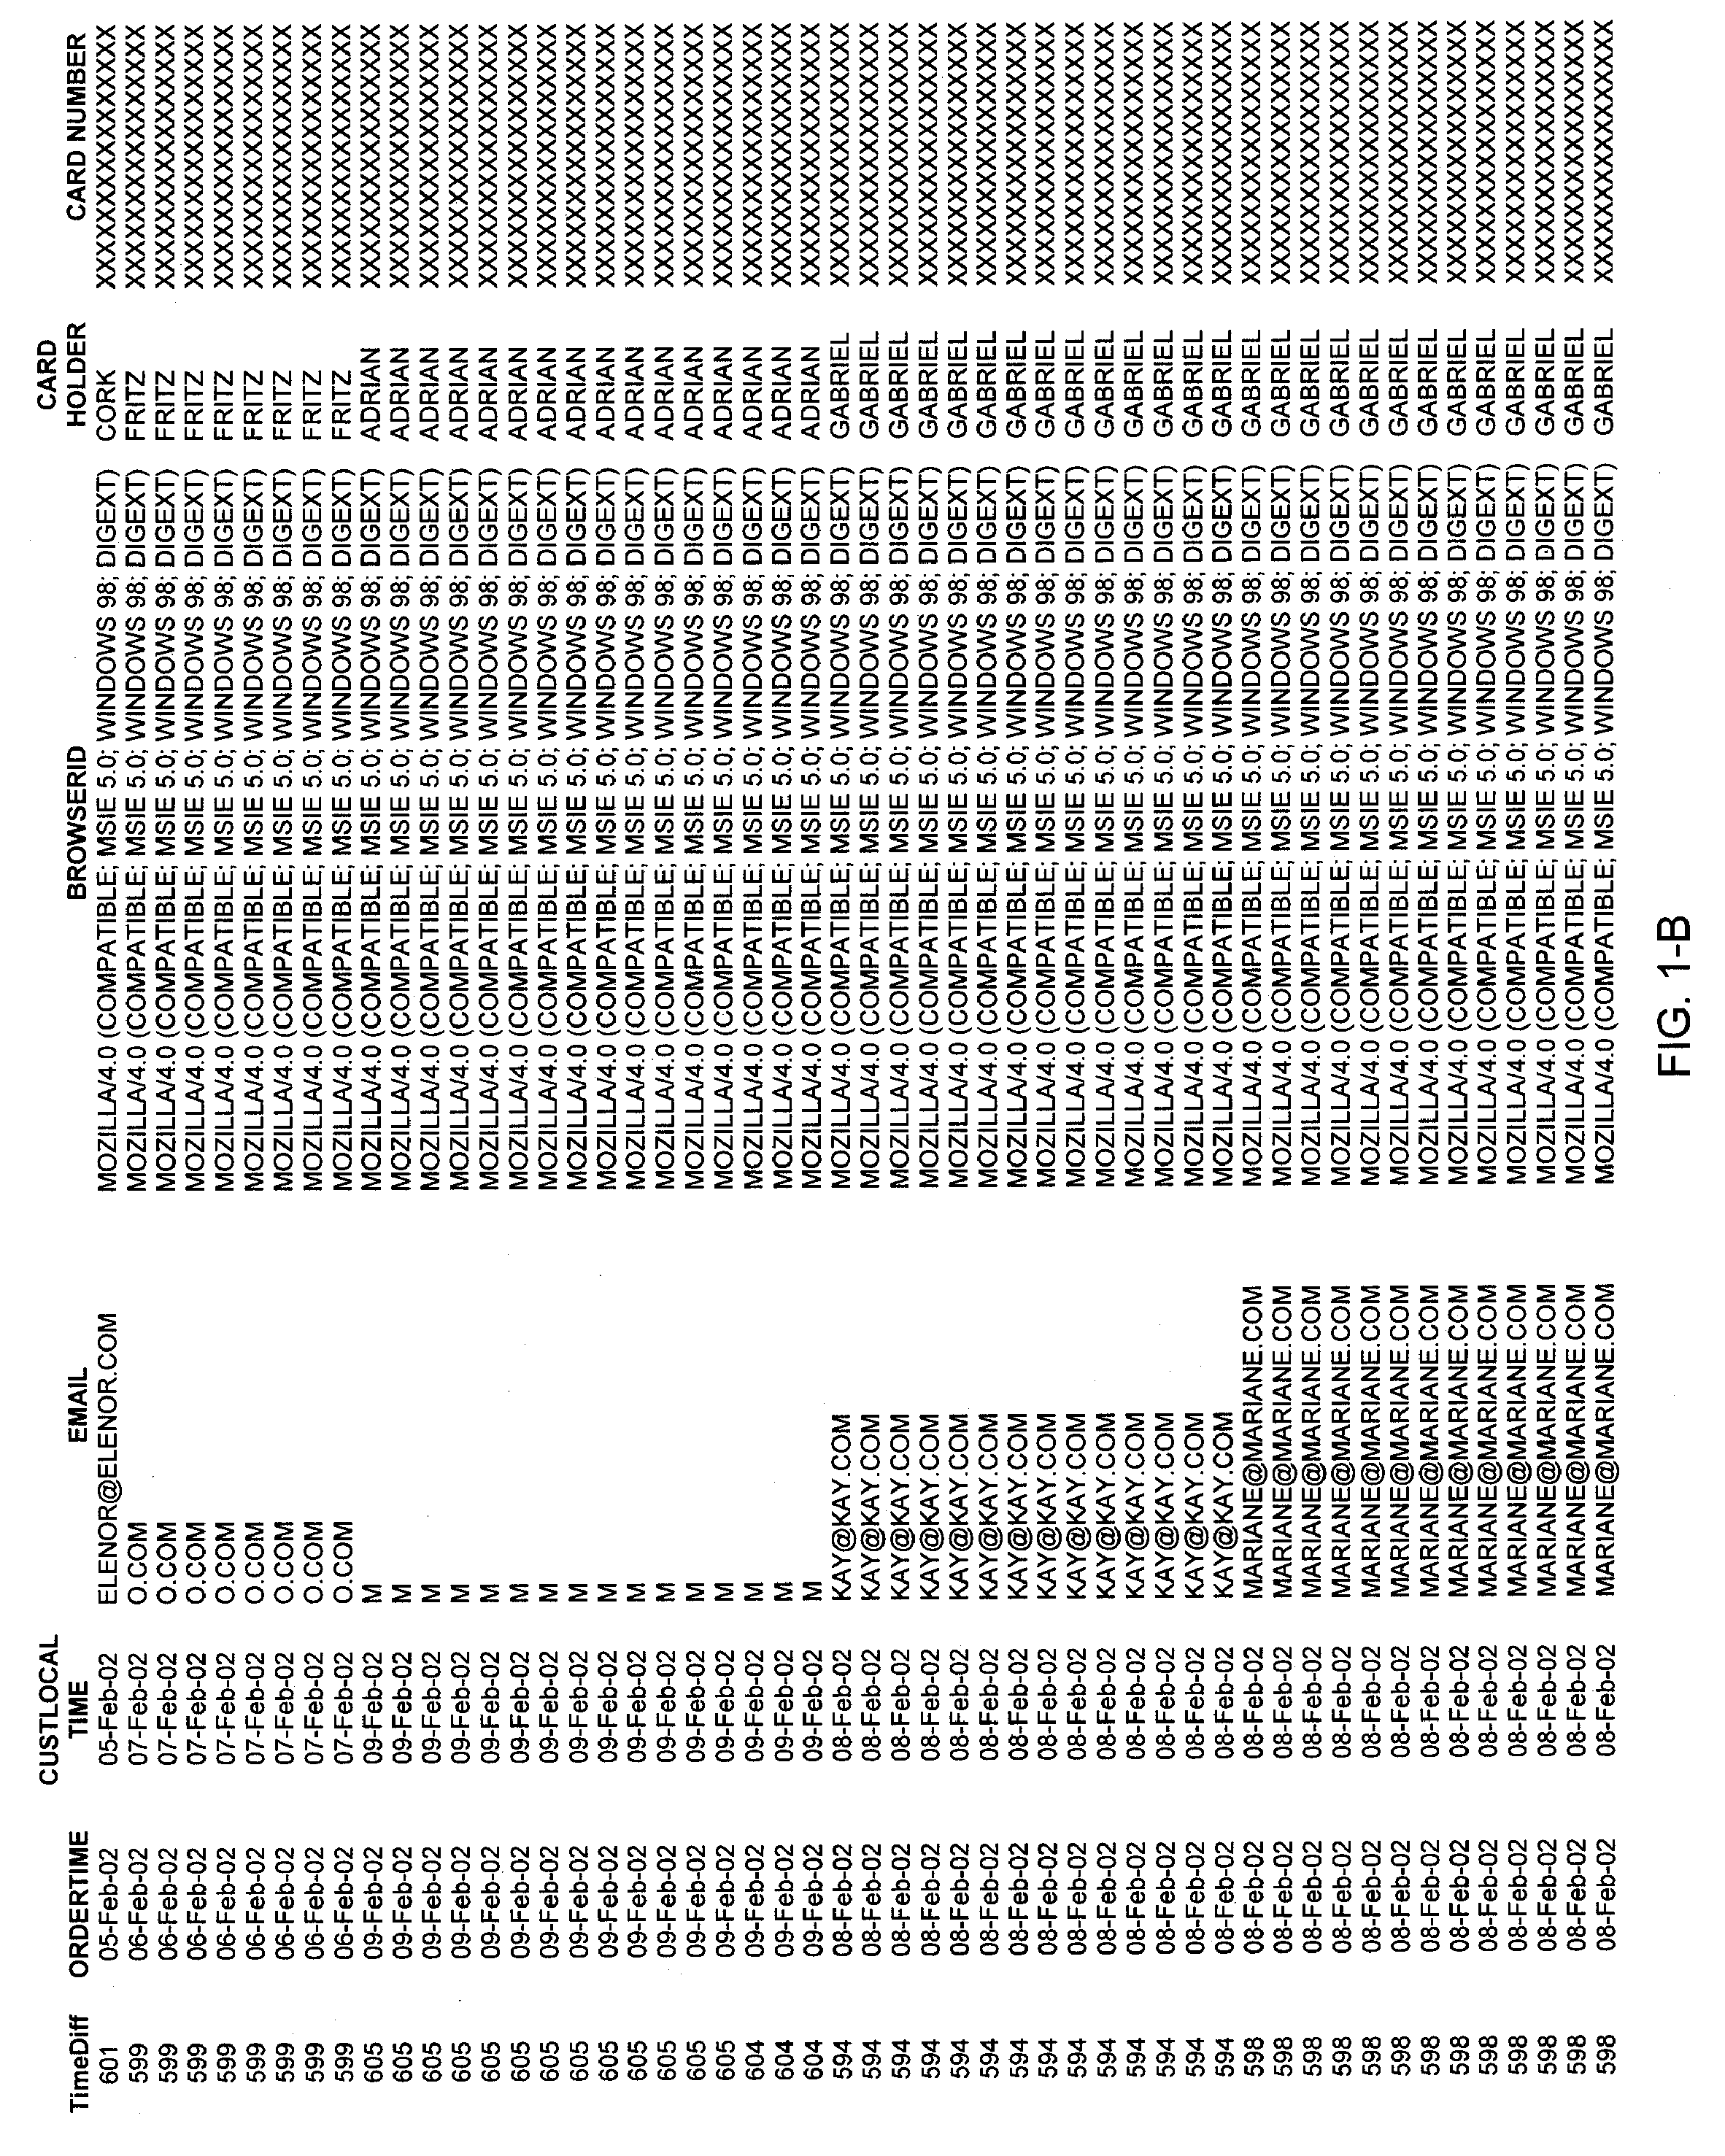 Method and system for identifying users and detecting fraud by use of the internet